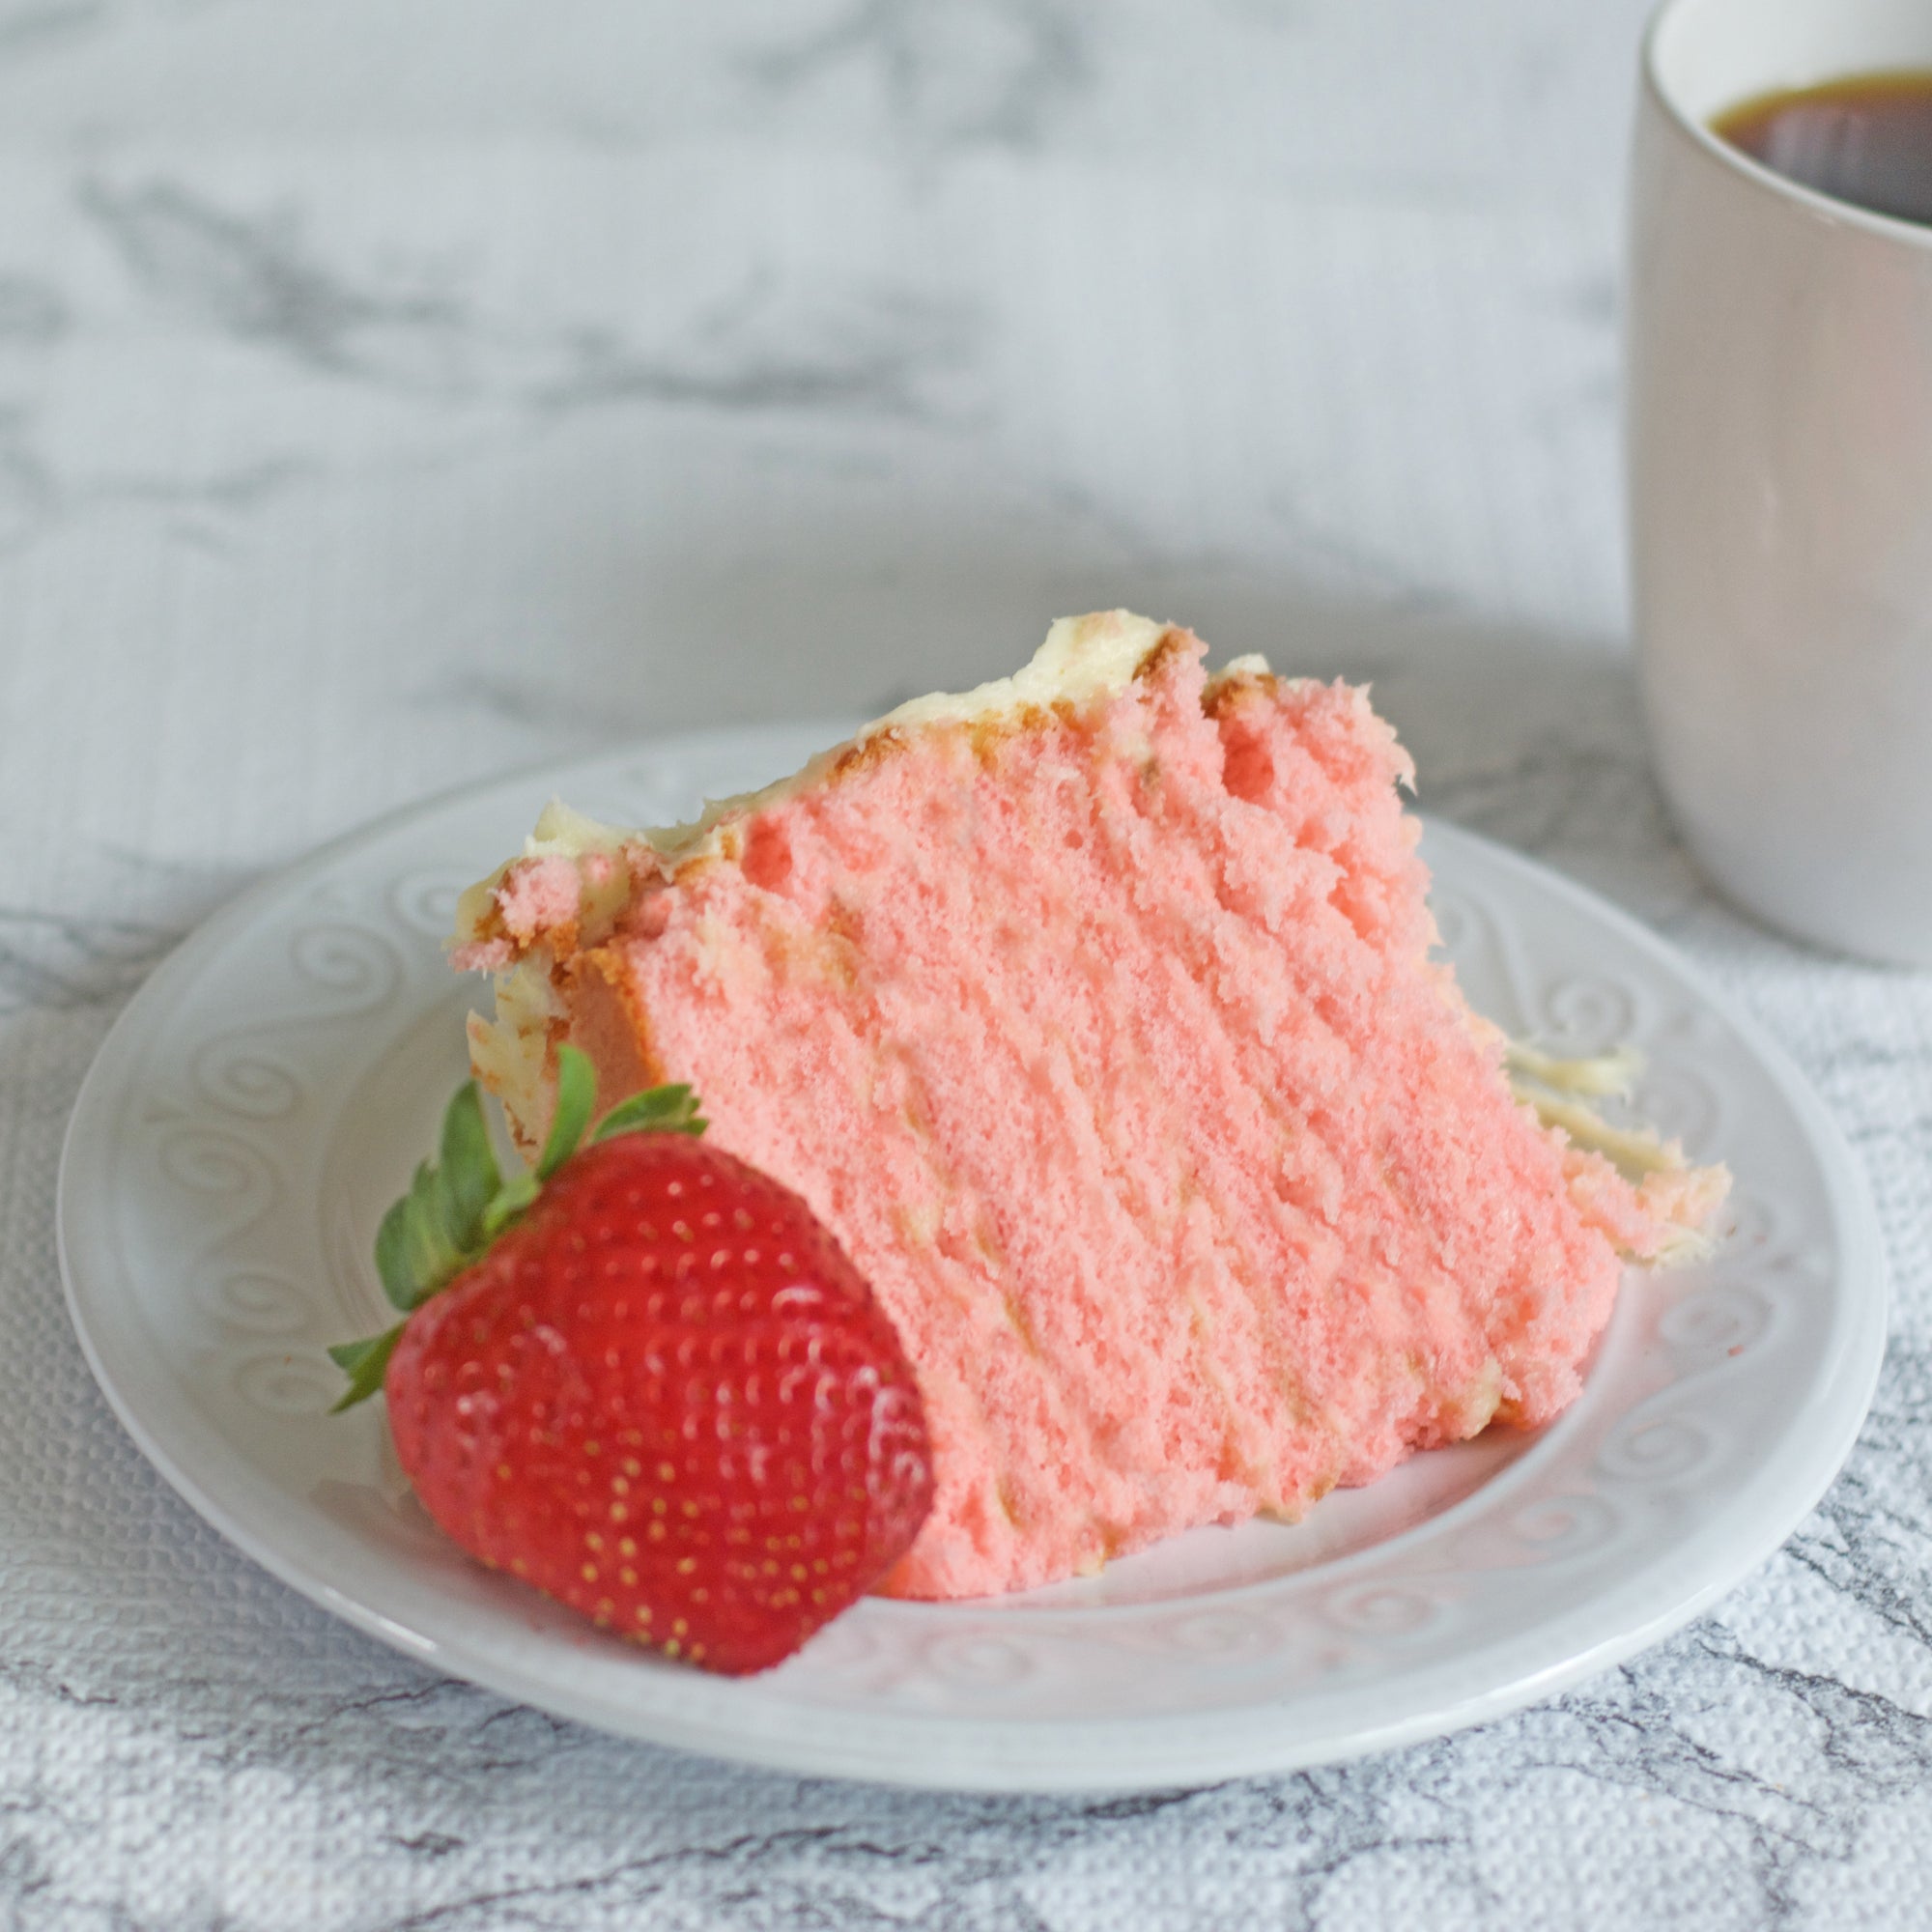 Strawberry Supreme Cake with Cream Cheese Frosting